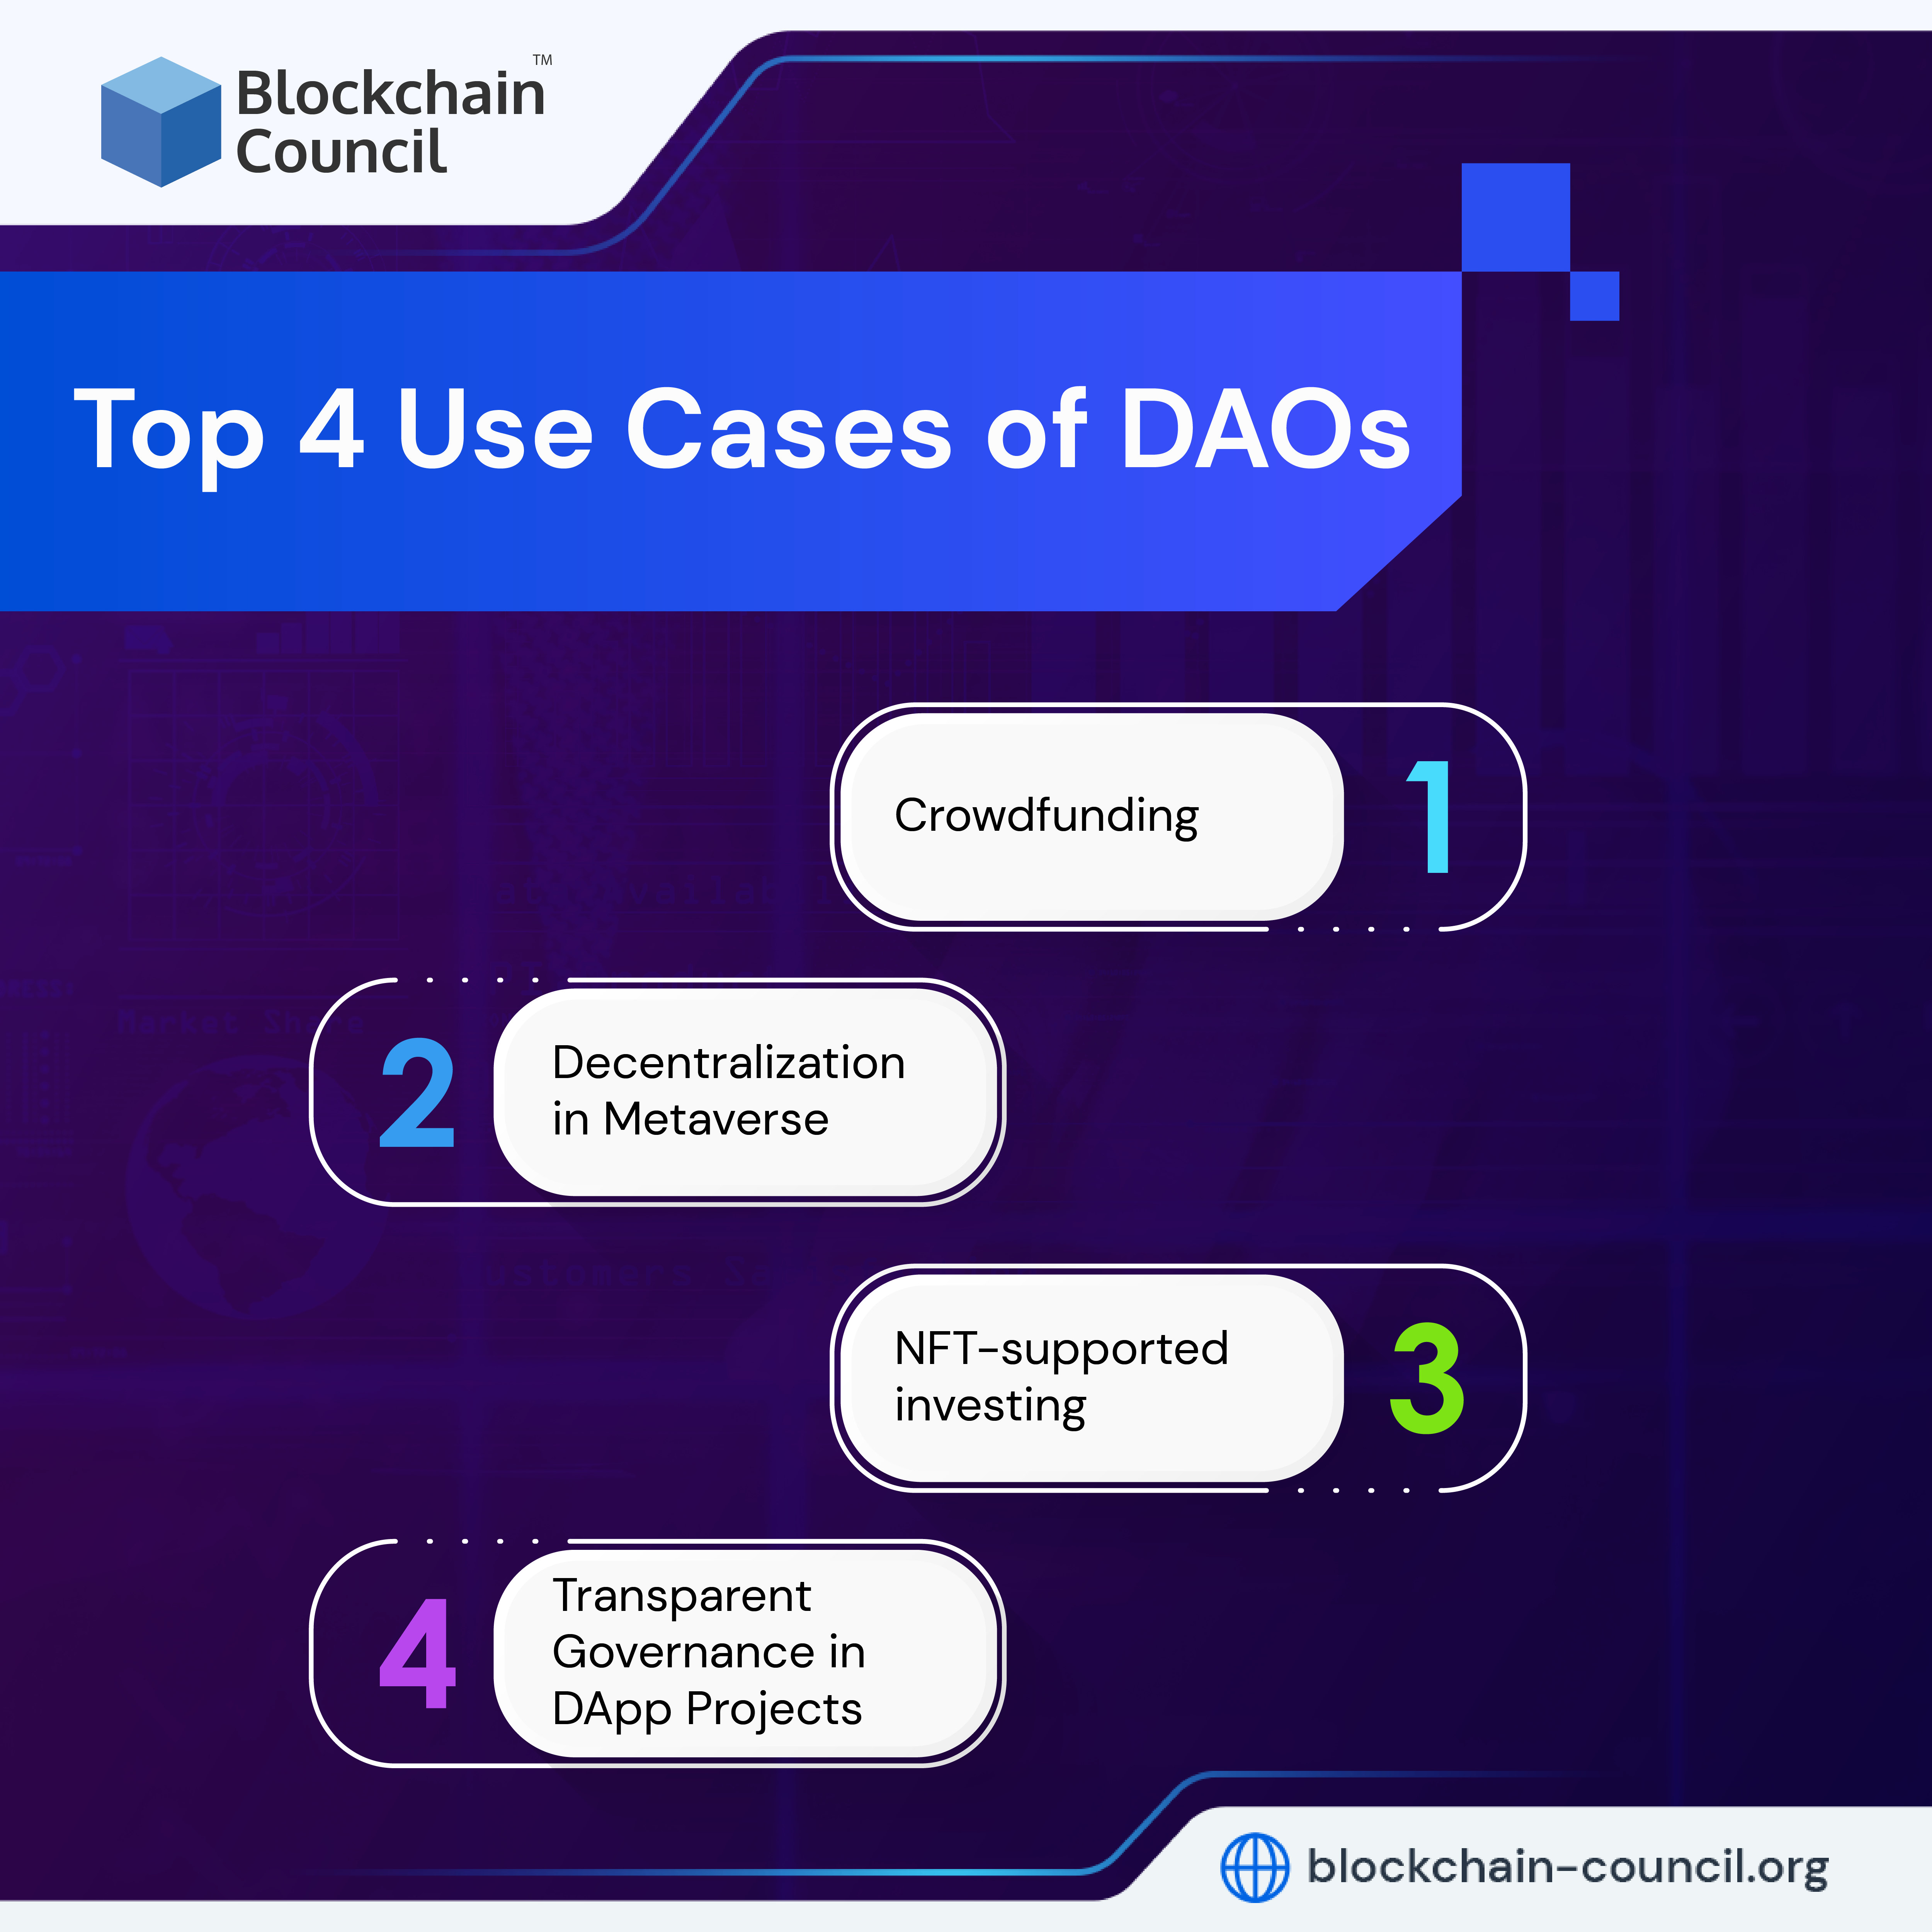 Top 4 Use Cases of DAOs